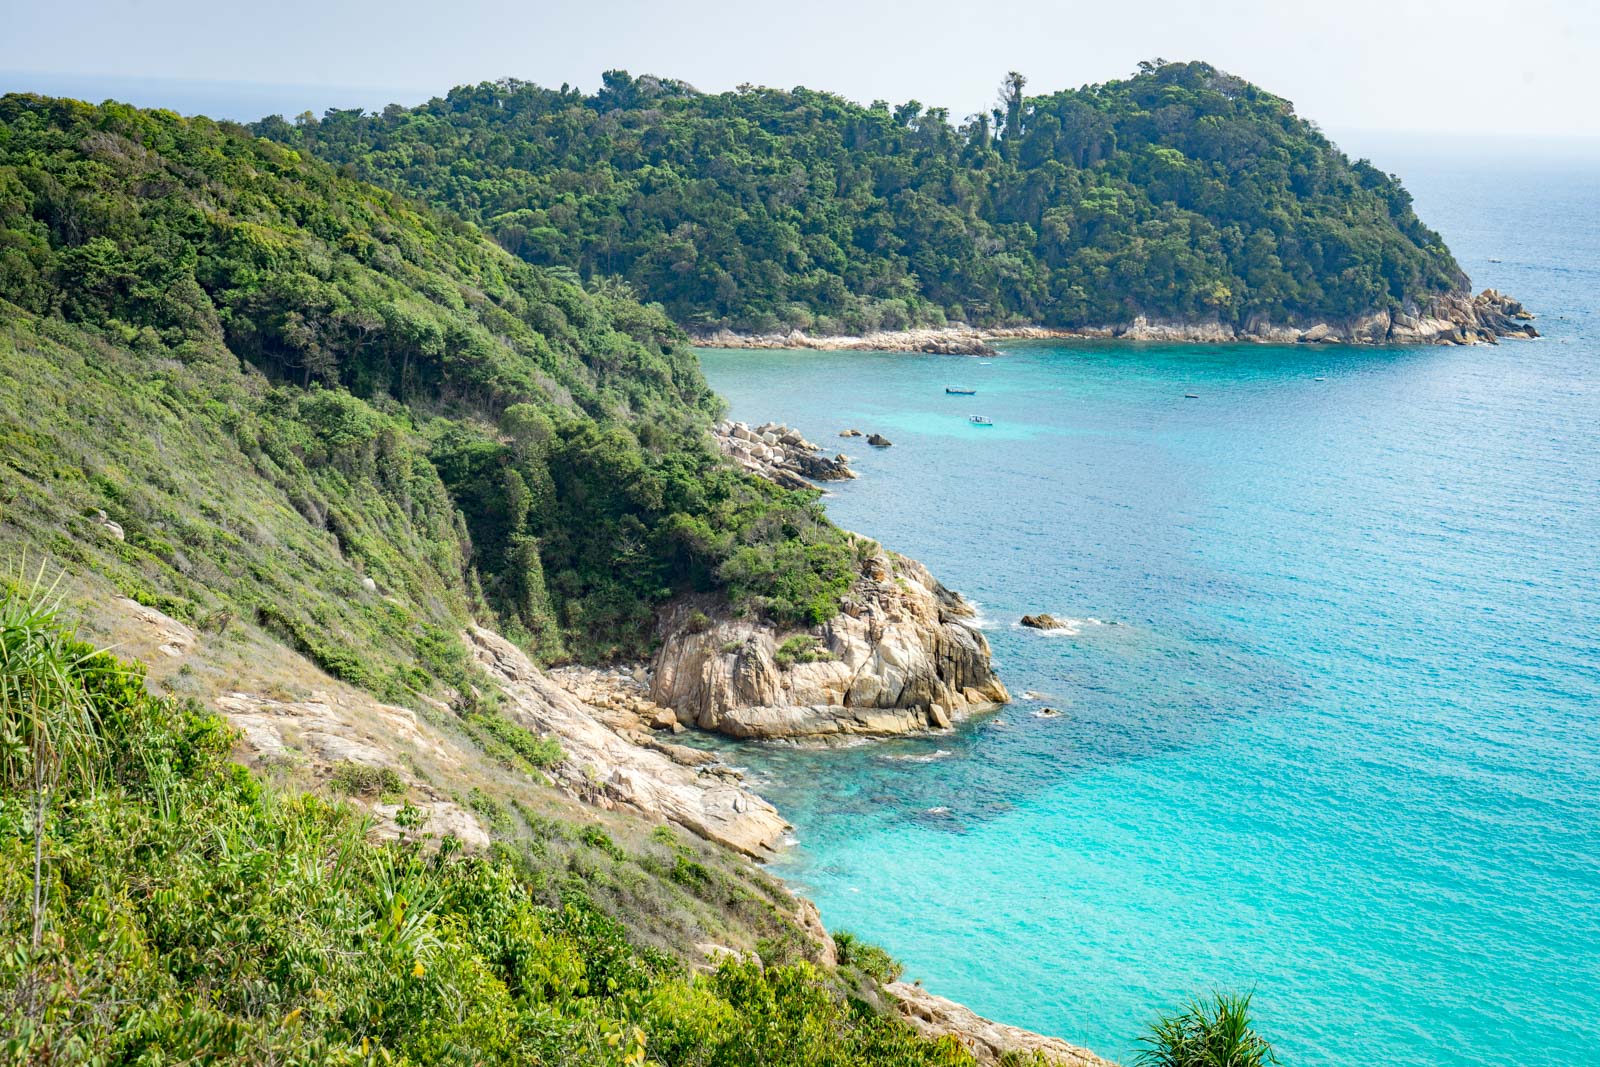 The best way to visit the Perhentian Islands in Malaysia